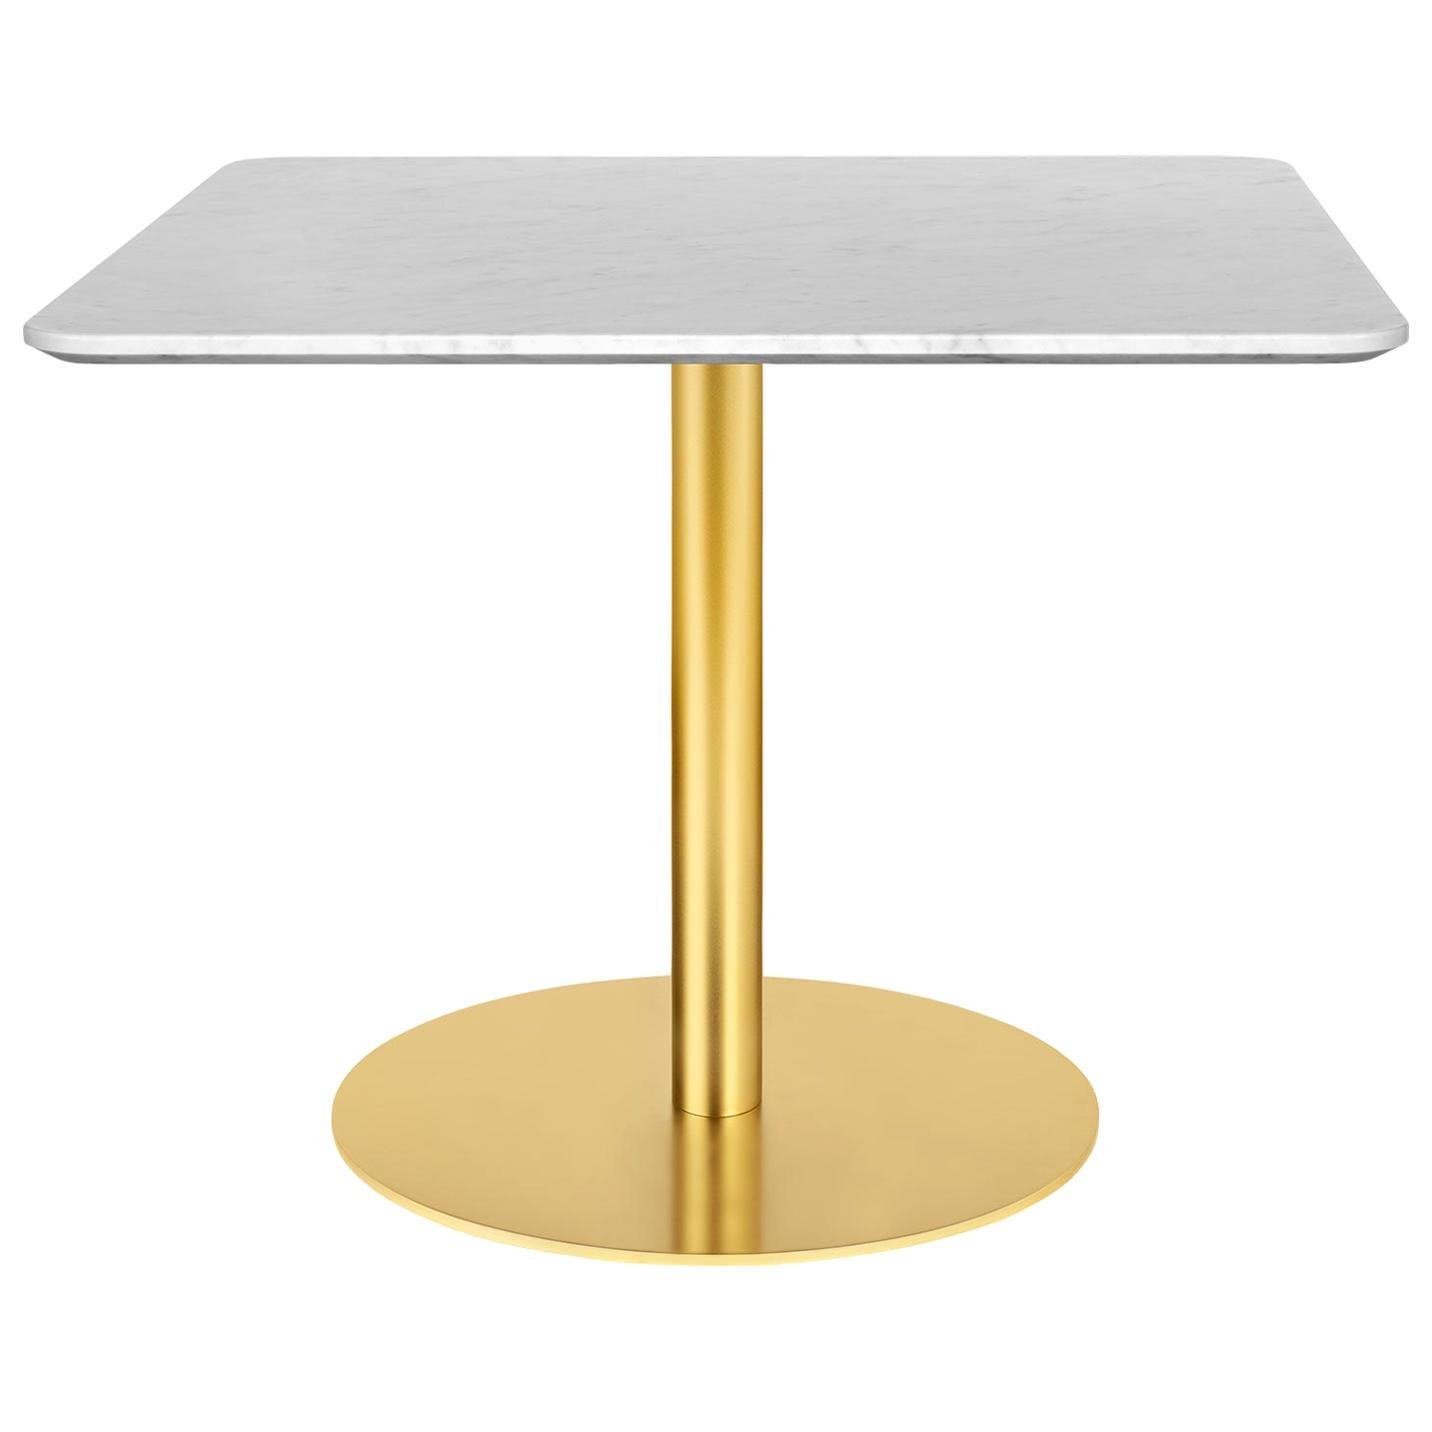 1.0 Lounge Table, Square, Round Brass Base, Medium, Marble For Sale